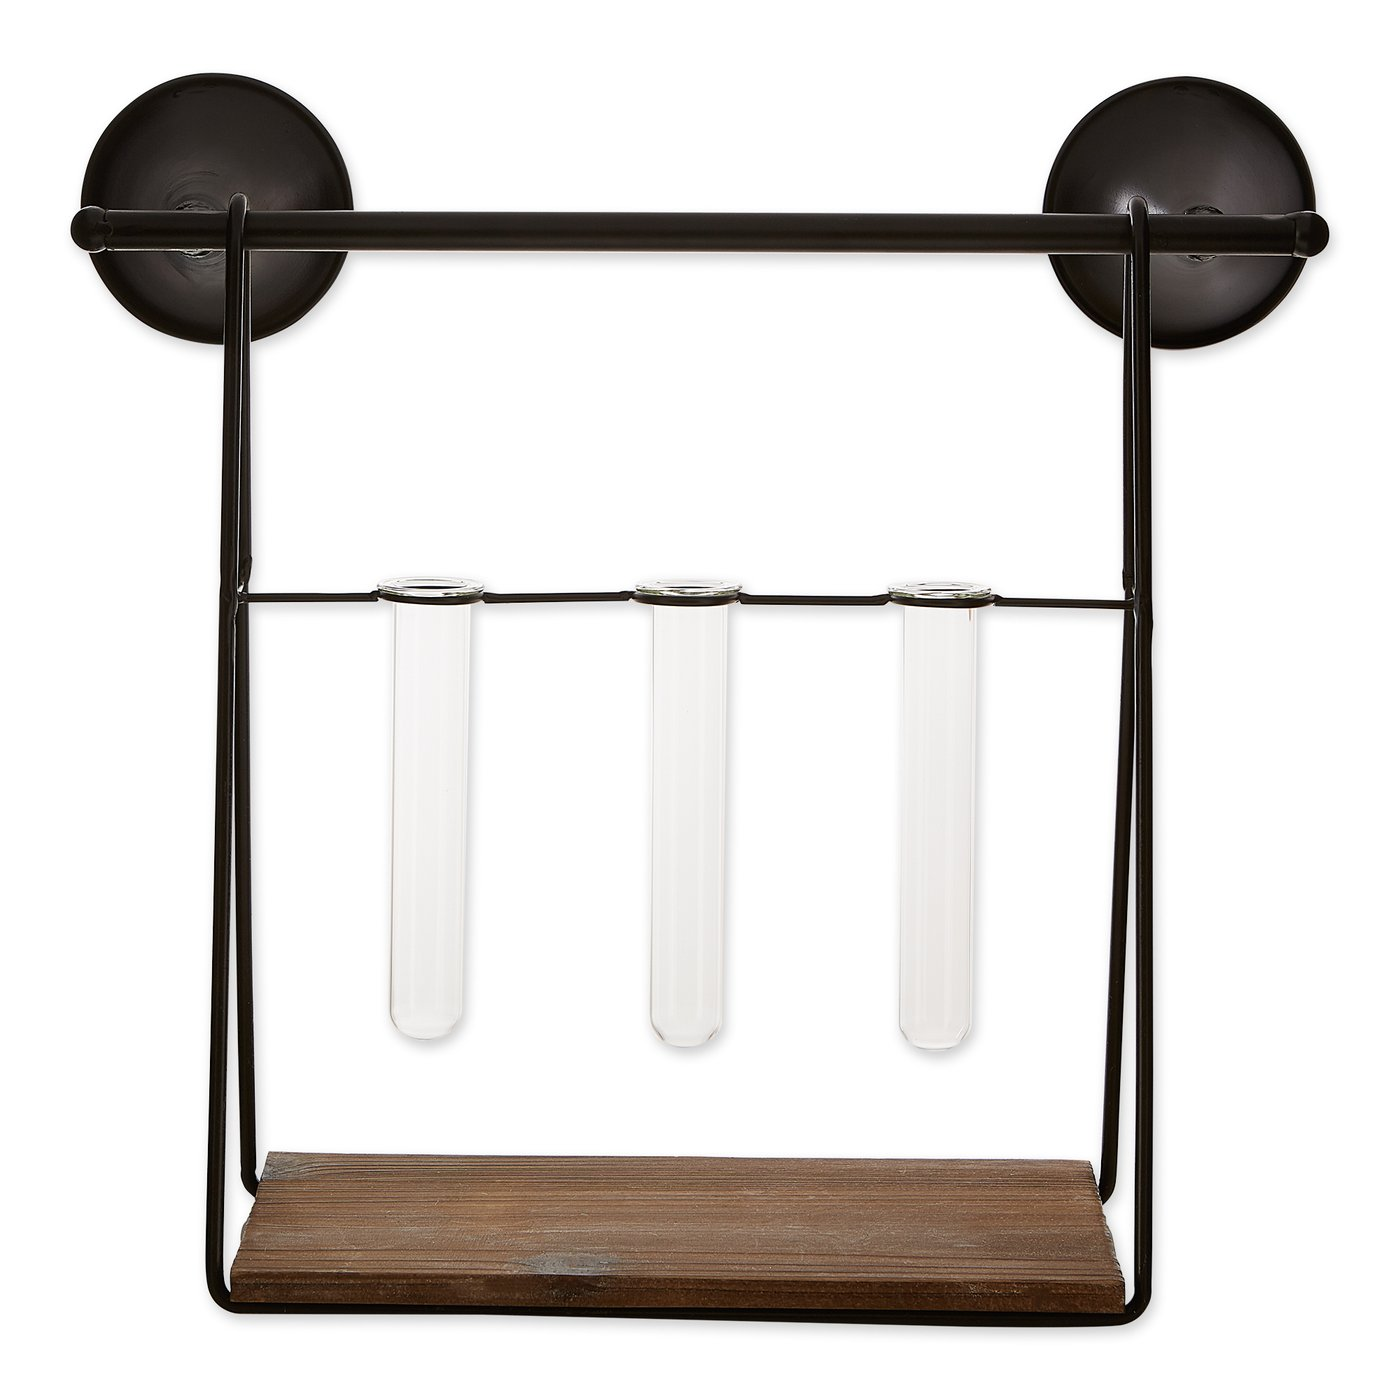 Industrial Look Wall-Shelf with Test Tube Vases